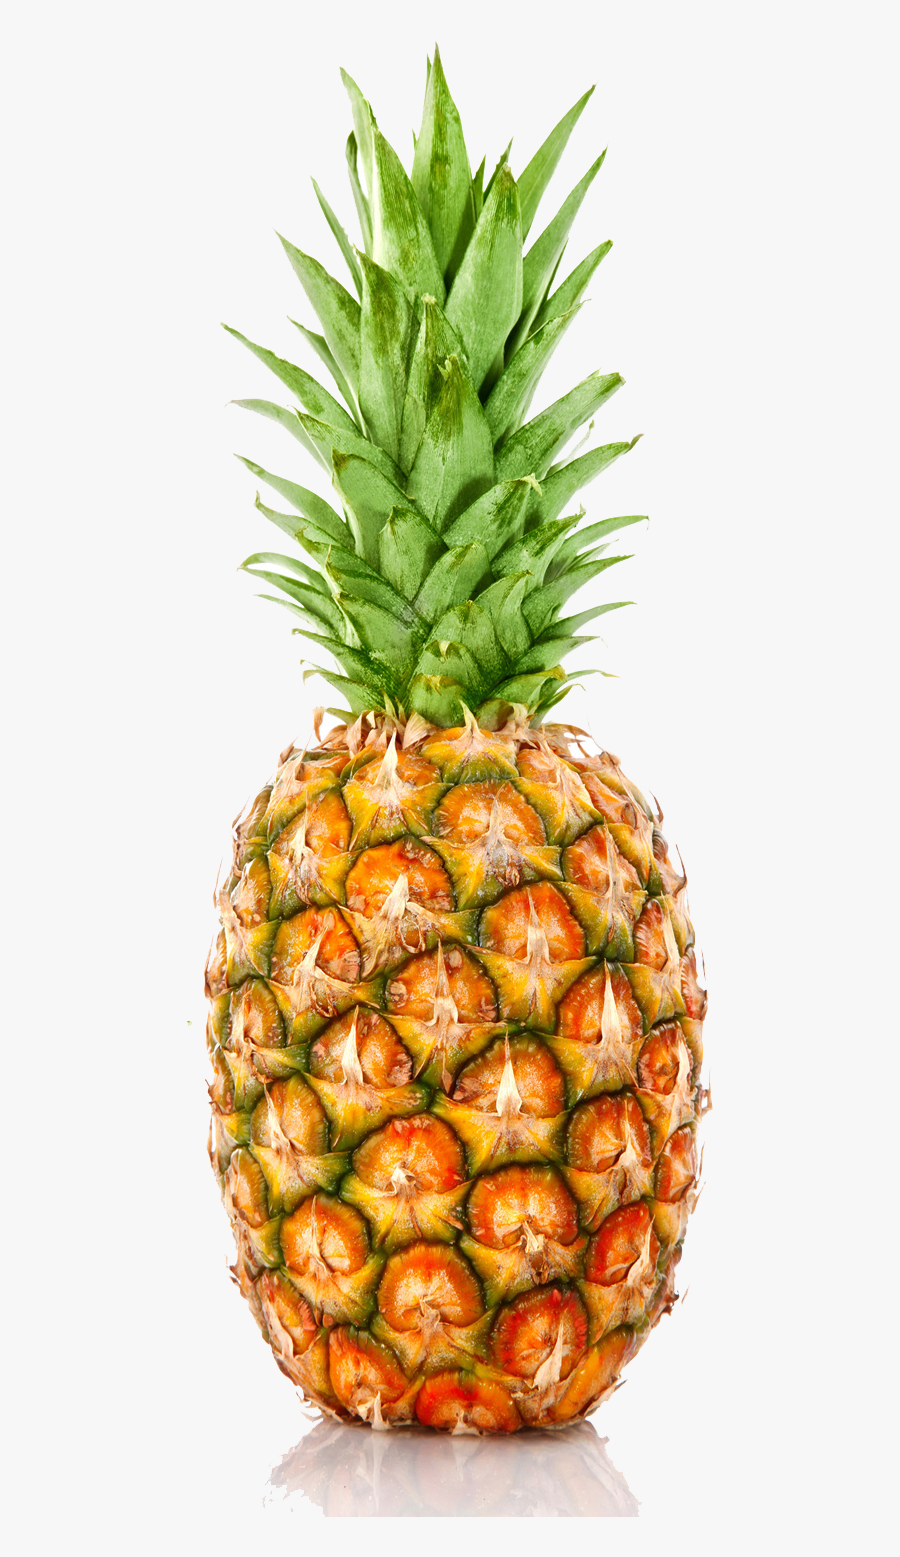 Pineapple Png File - Transparent Pineapple Png, Transparent Clipart